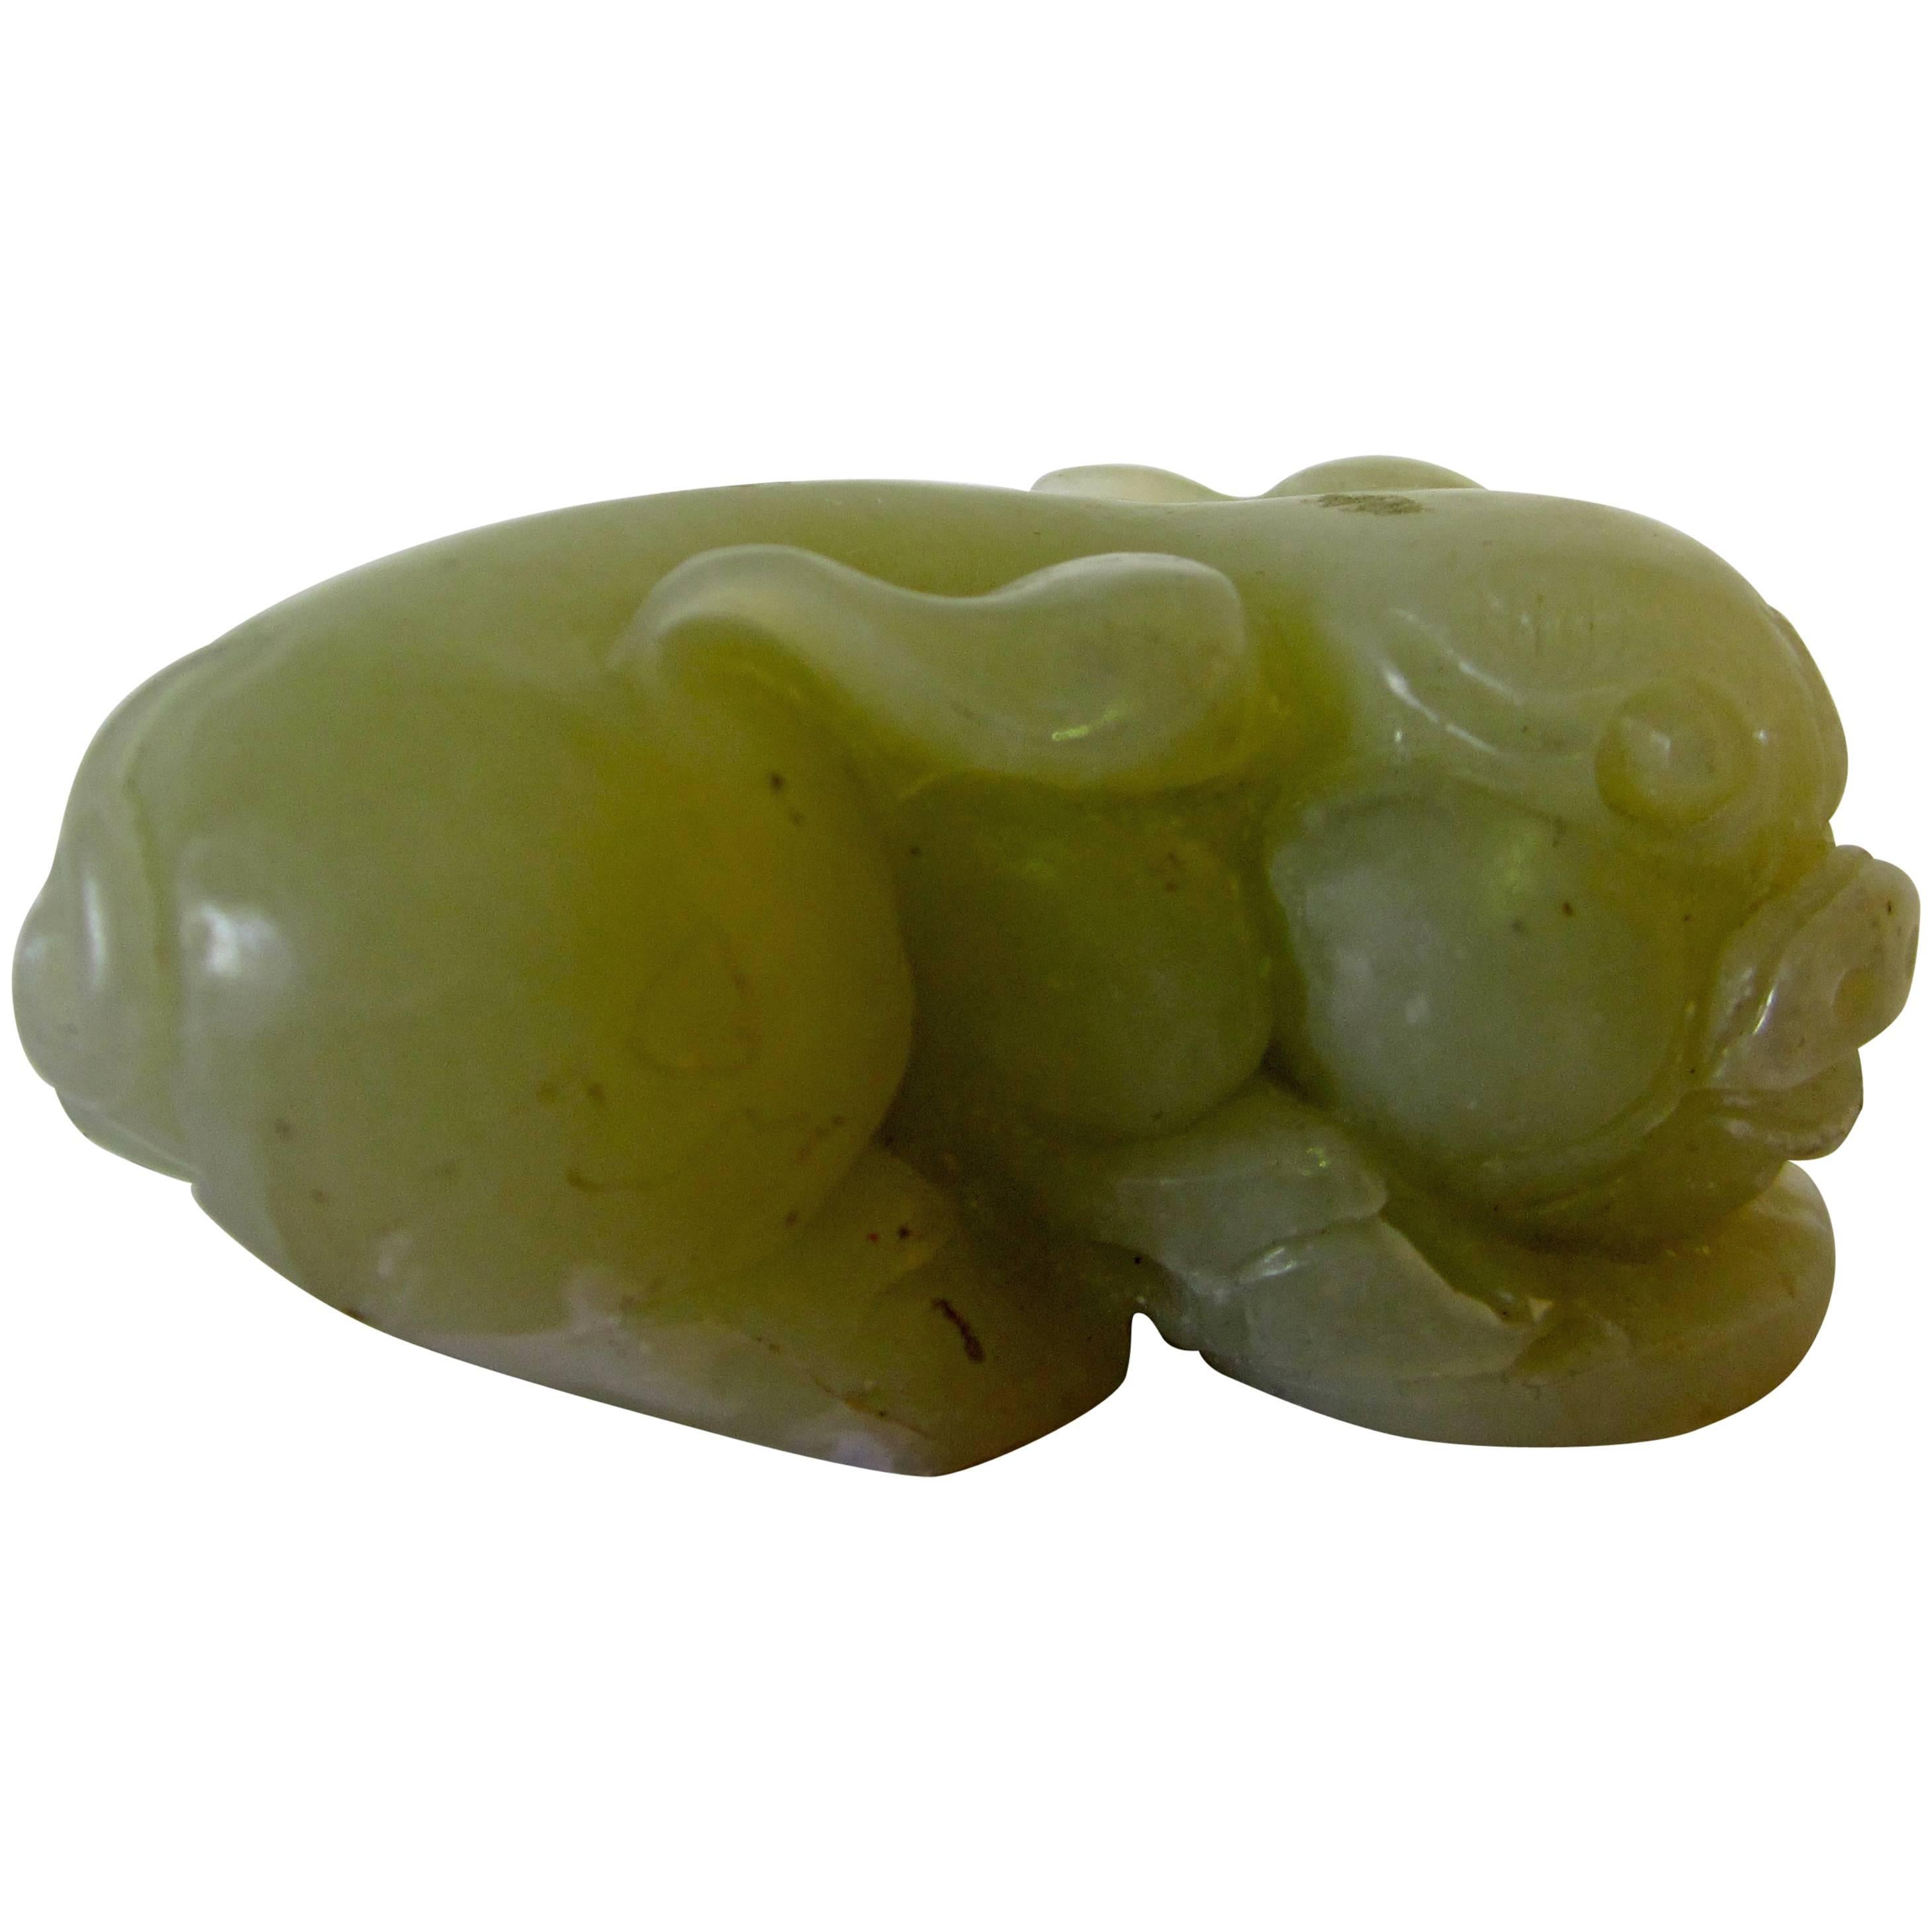 Green Jade Figure of a Pig For Sale